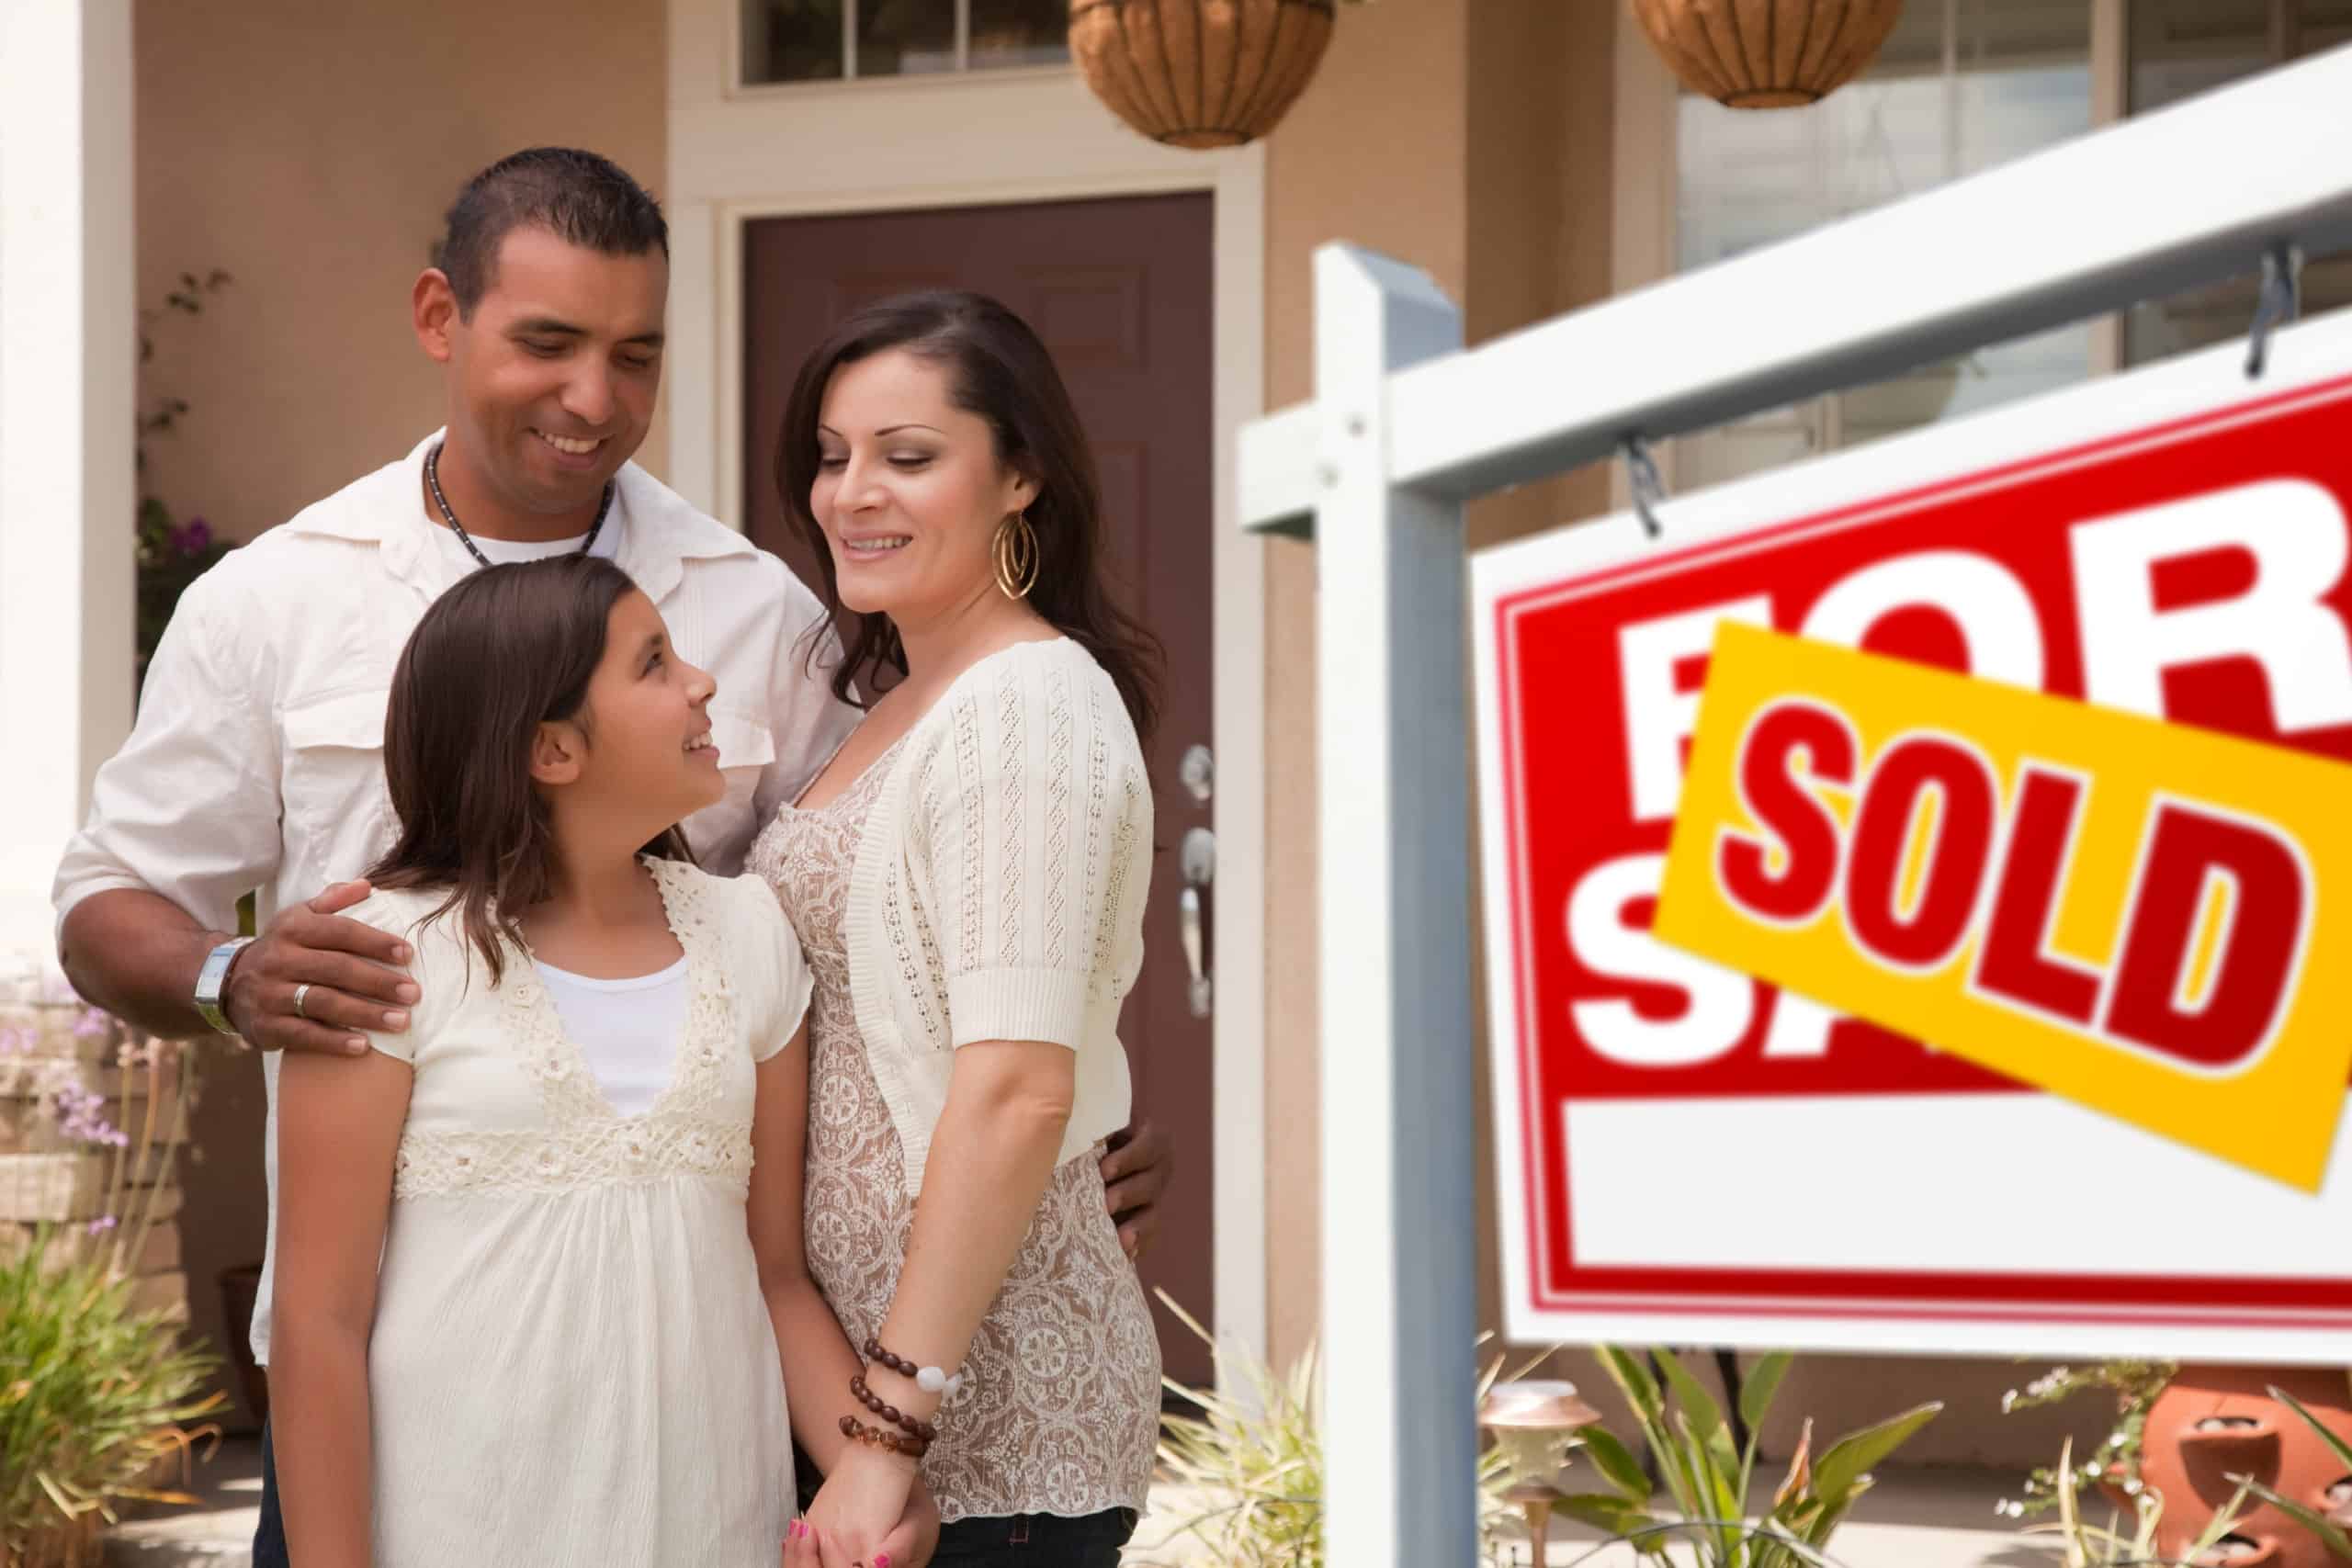 Hispanic mother, father, and daughter in front of their new home with for sale real estate sign.